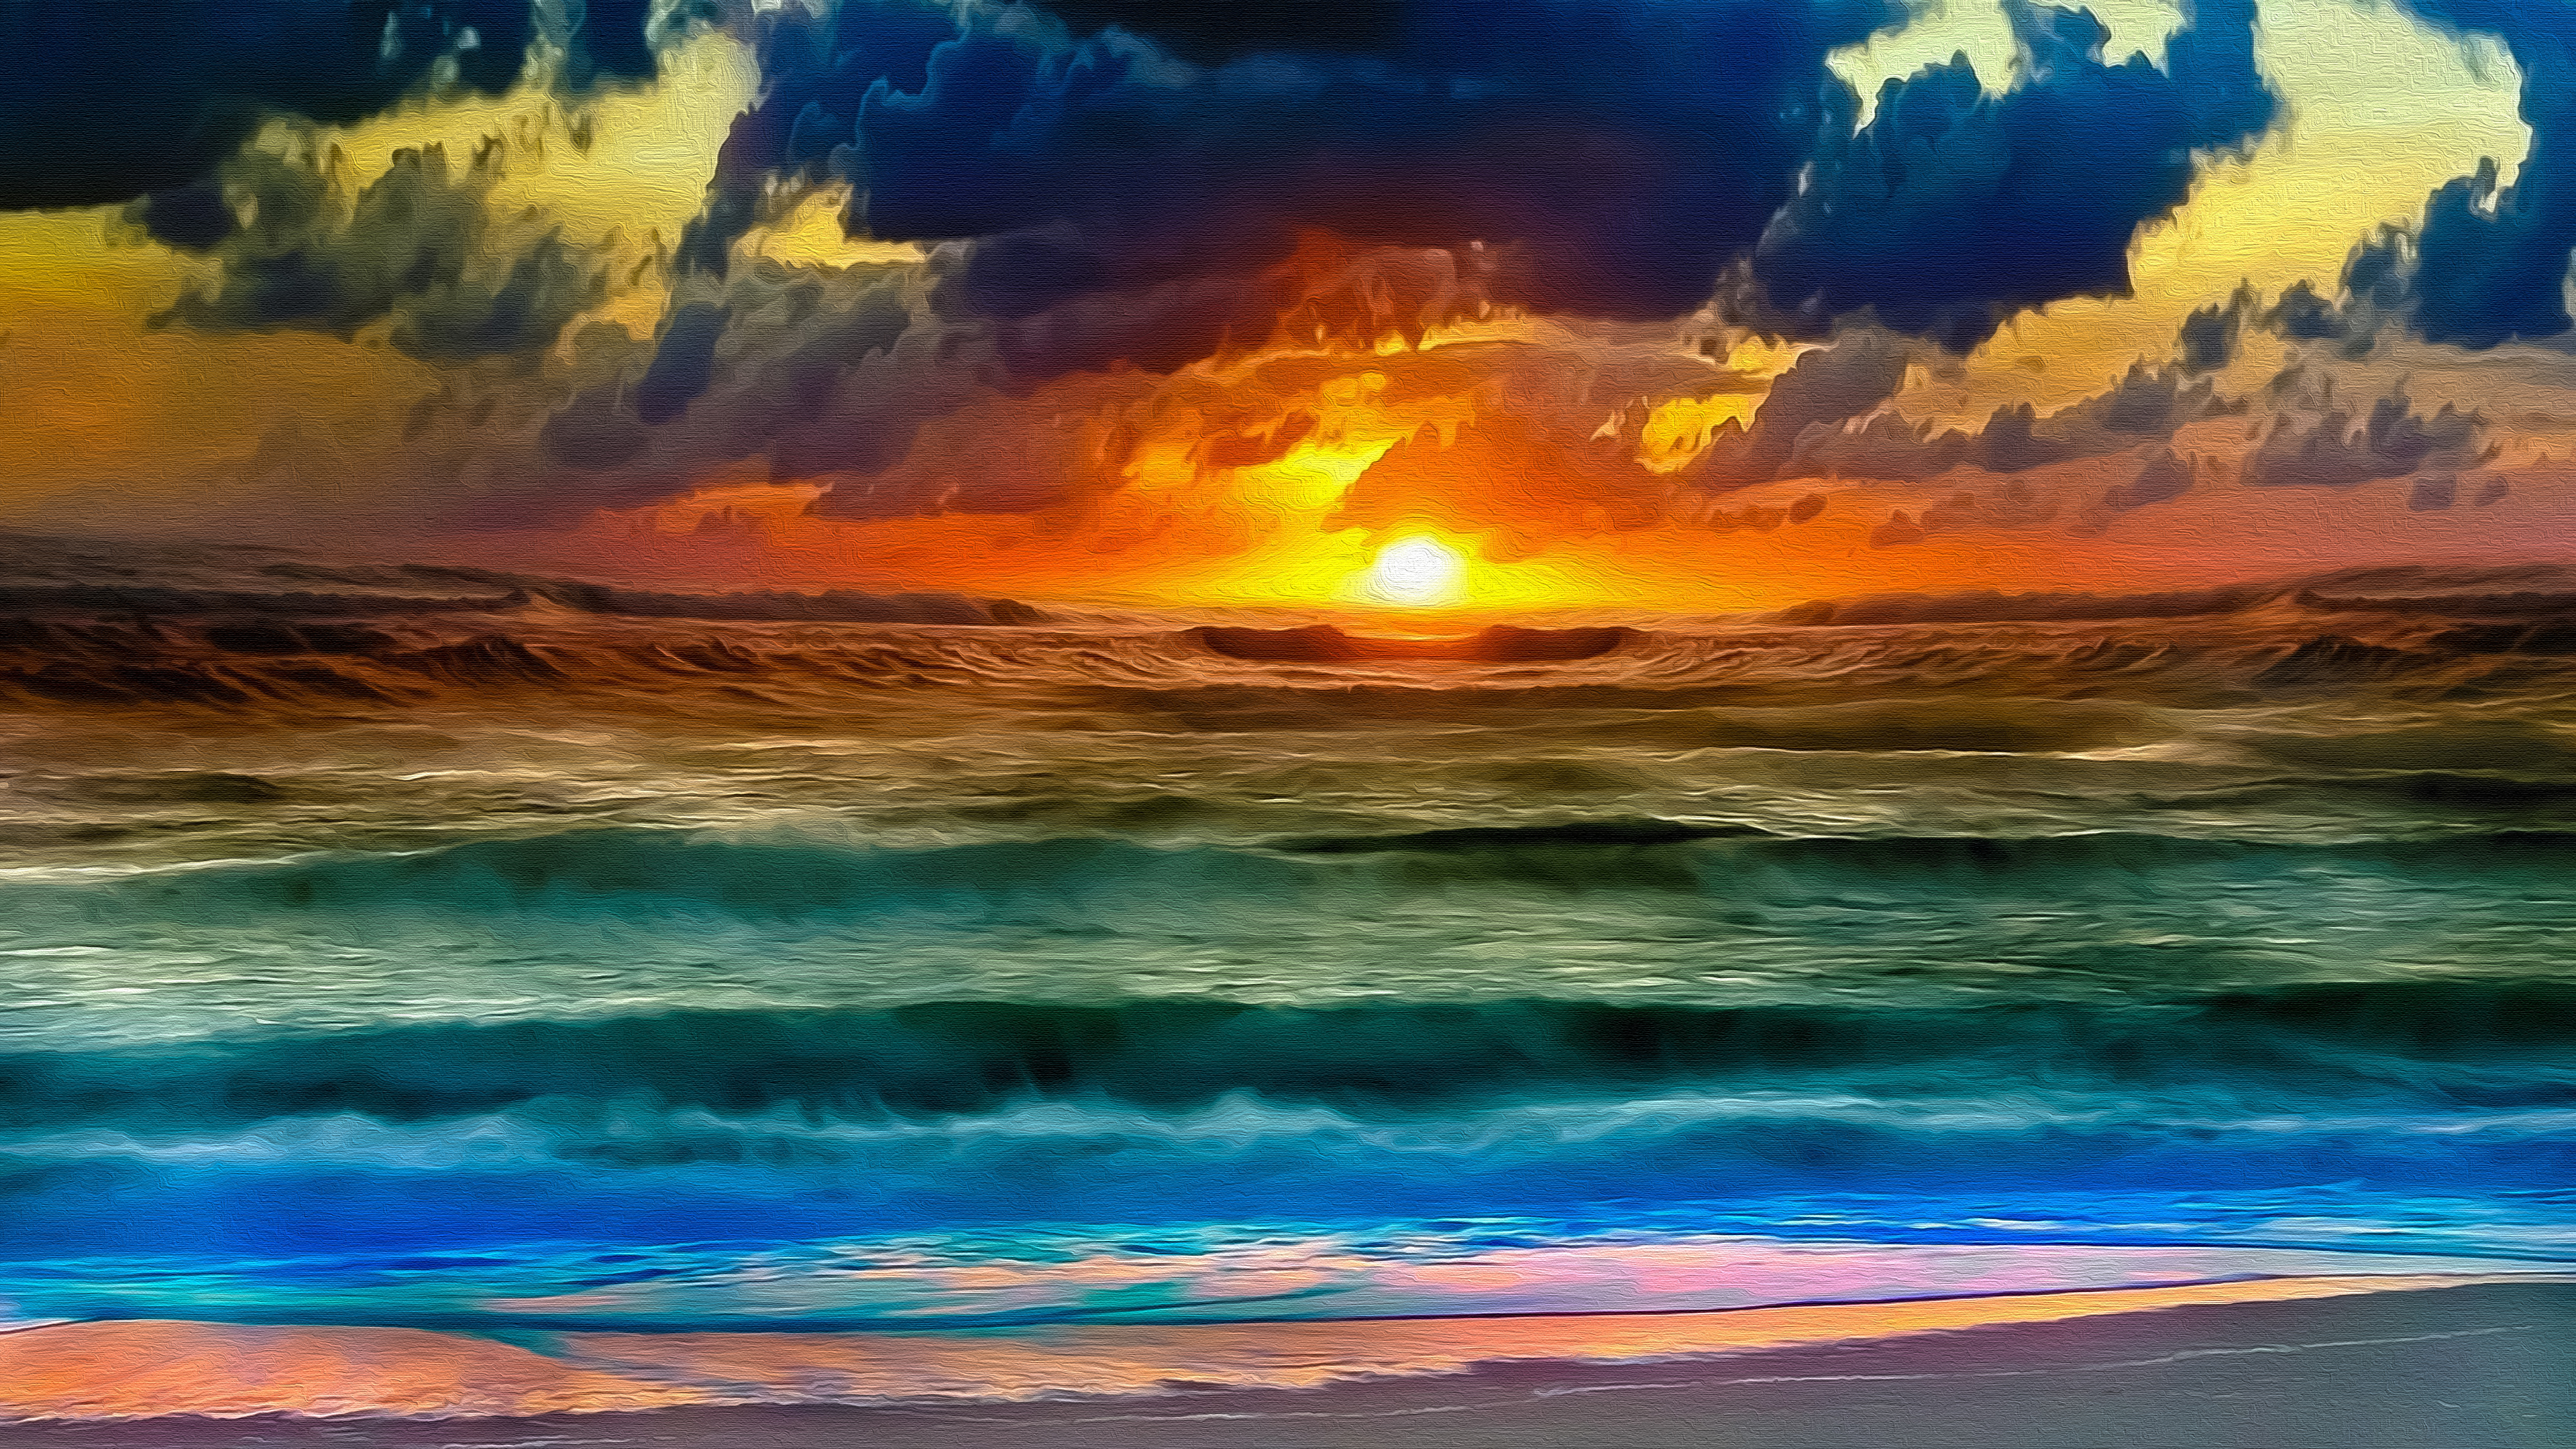 Colors Oil Painting Sea Sunset 3840x2160